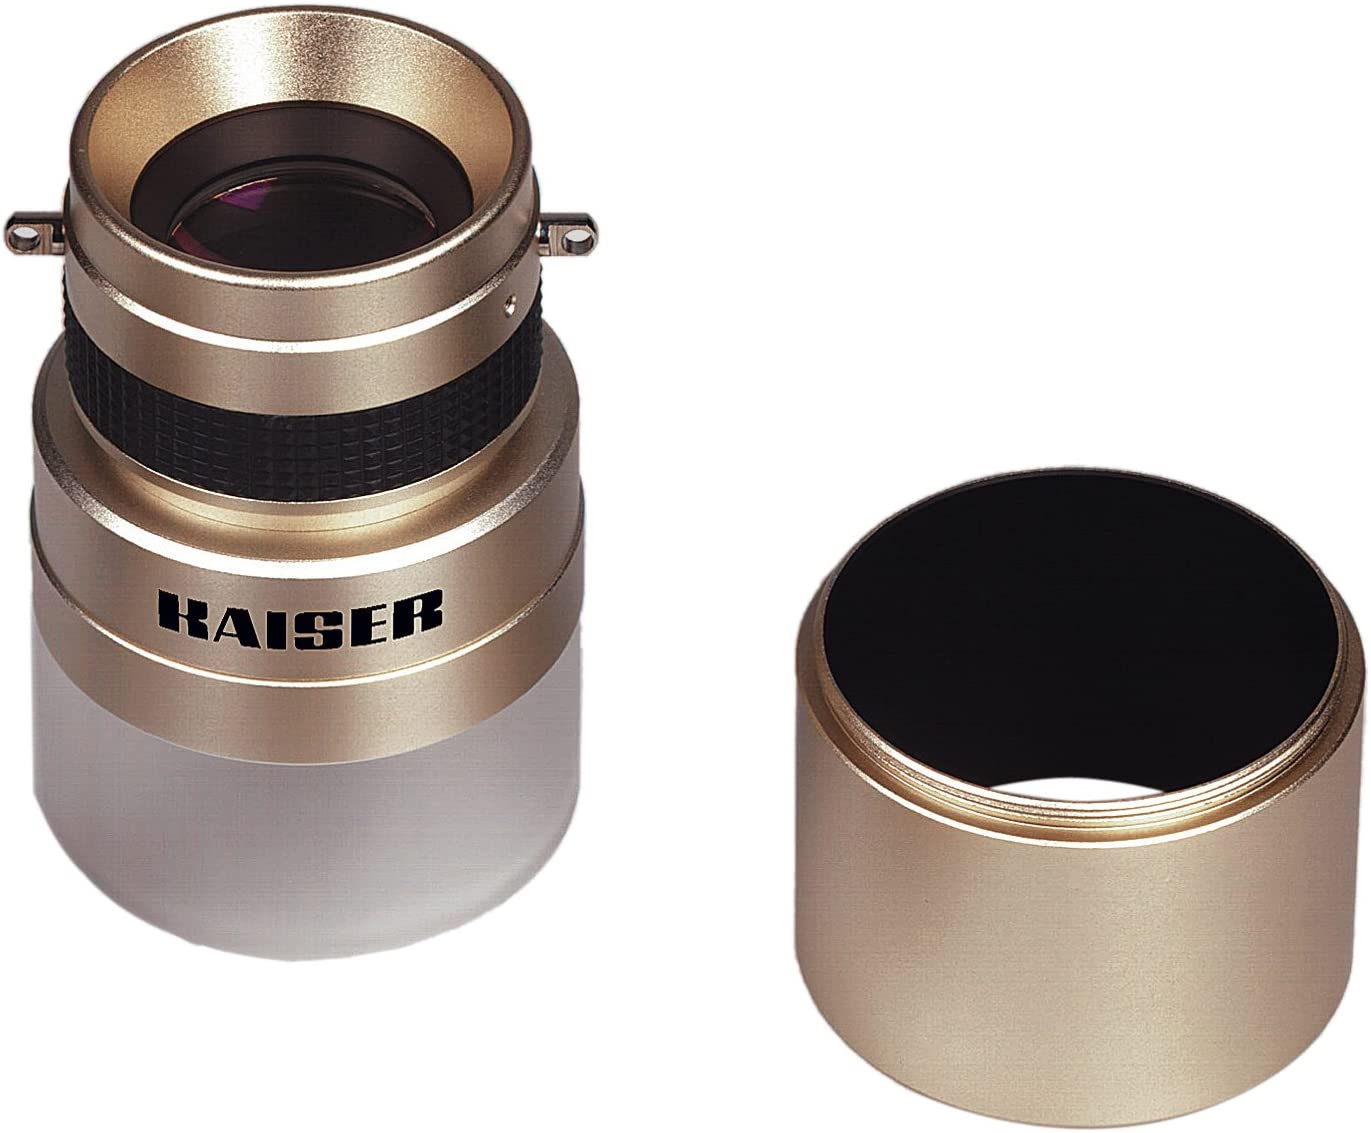 Kaiser 4x High Quality Loupe Magnifier -luuppi